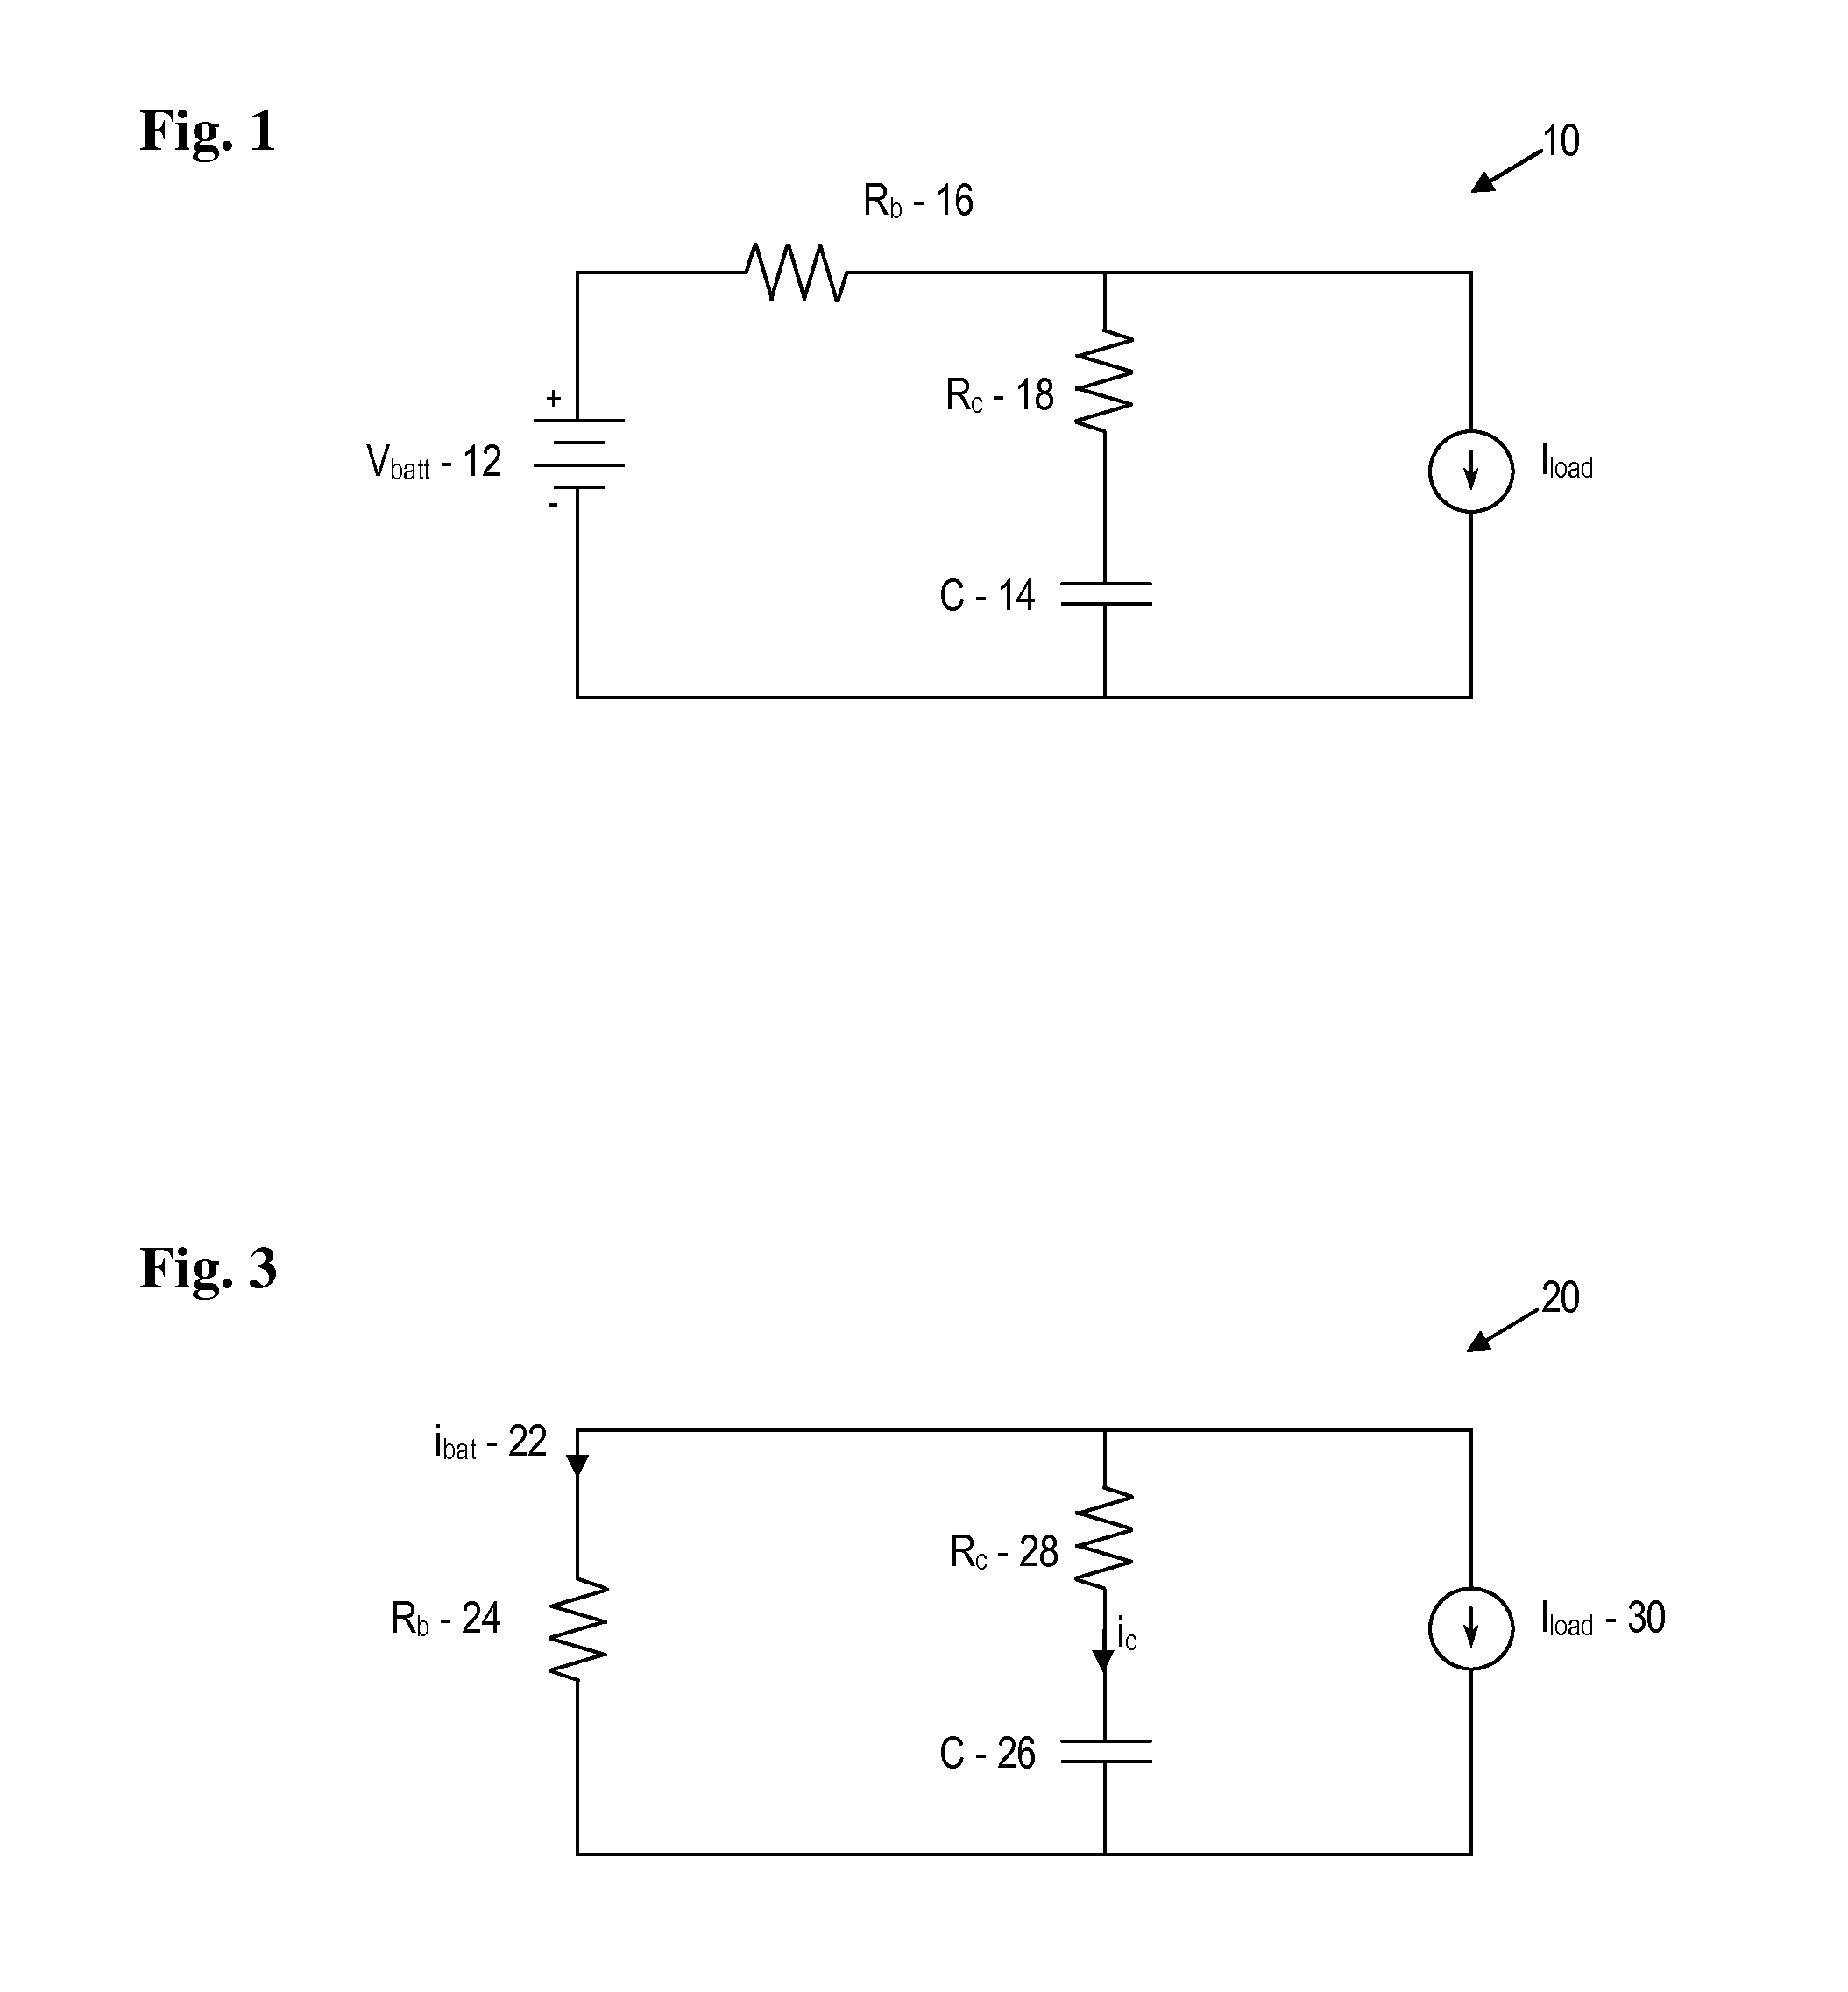 Battery-capacitor hybrid energy storage system for high temperature applications